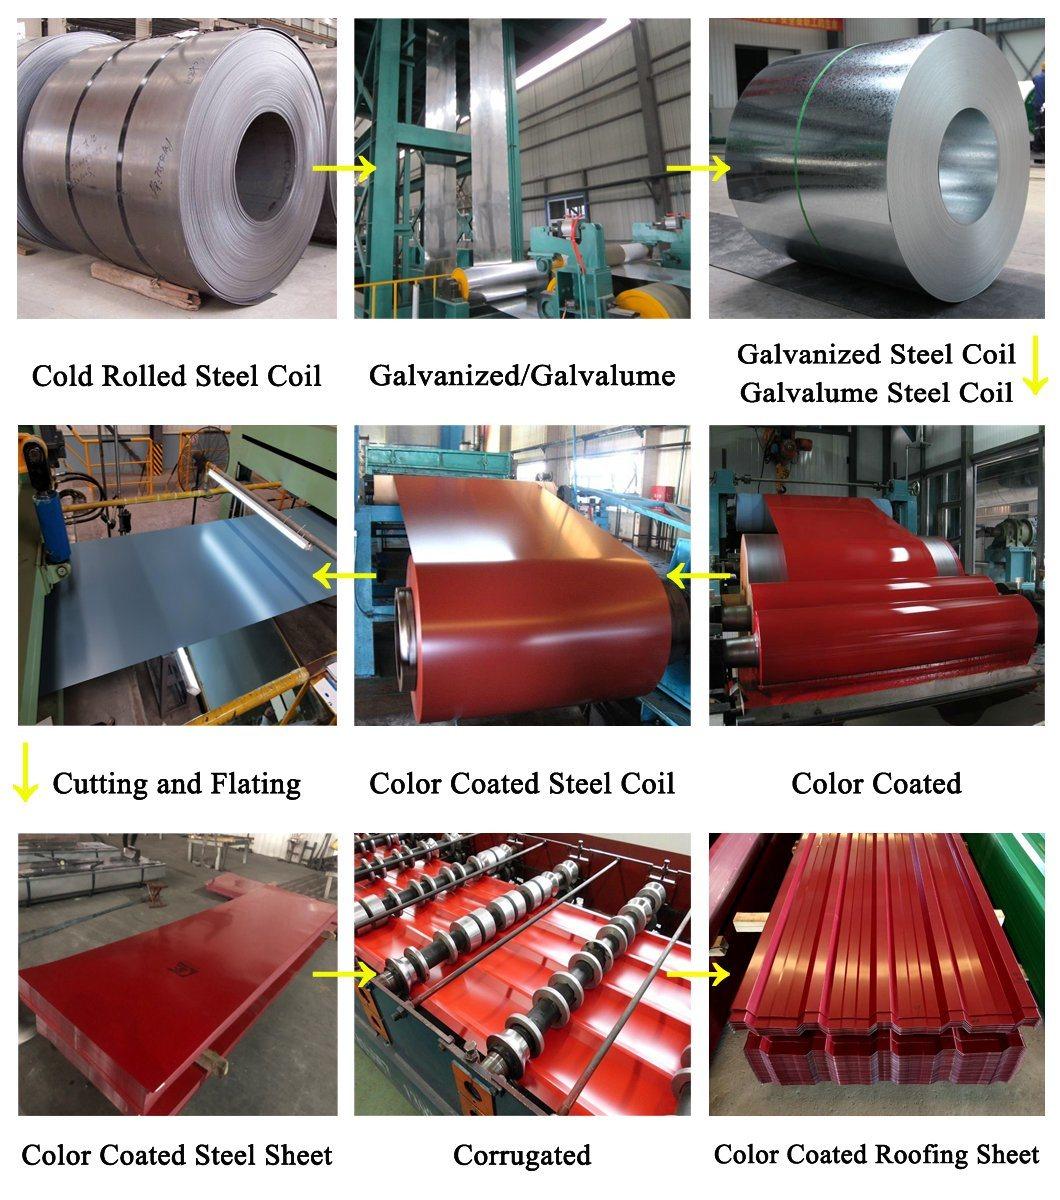 Color Coated Corrugated Roof Iron Galvanized Metal Roofing Sheet